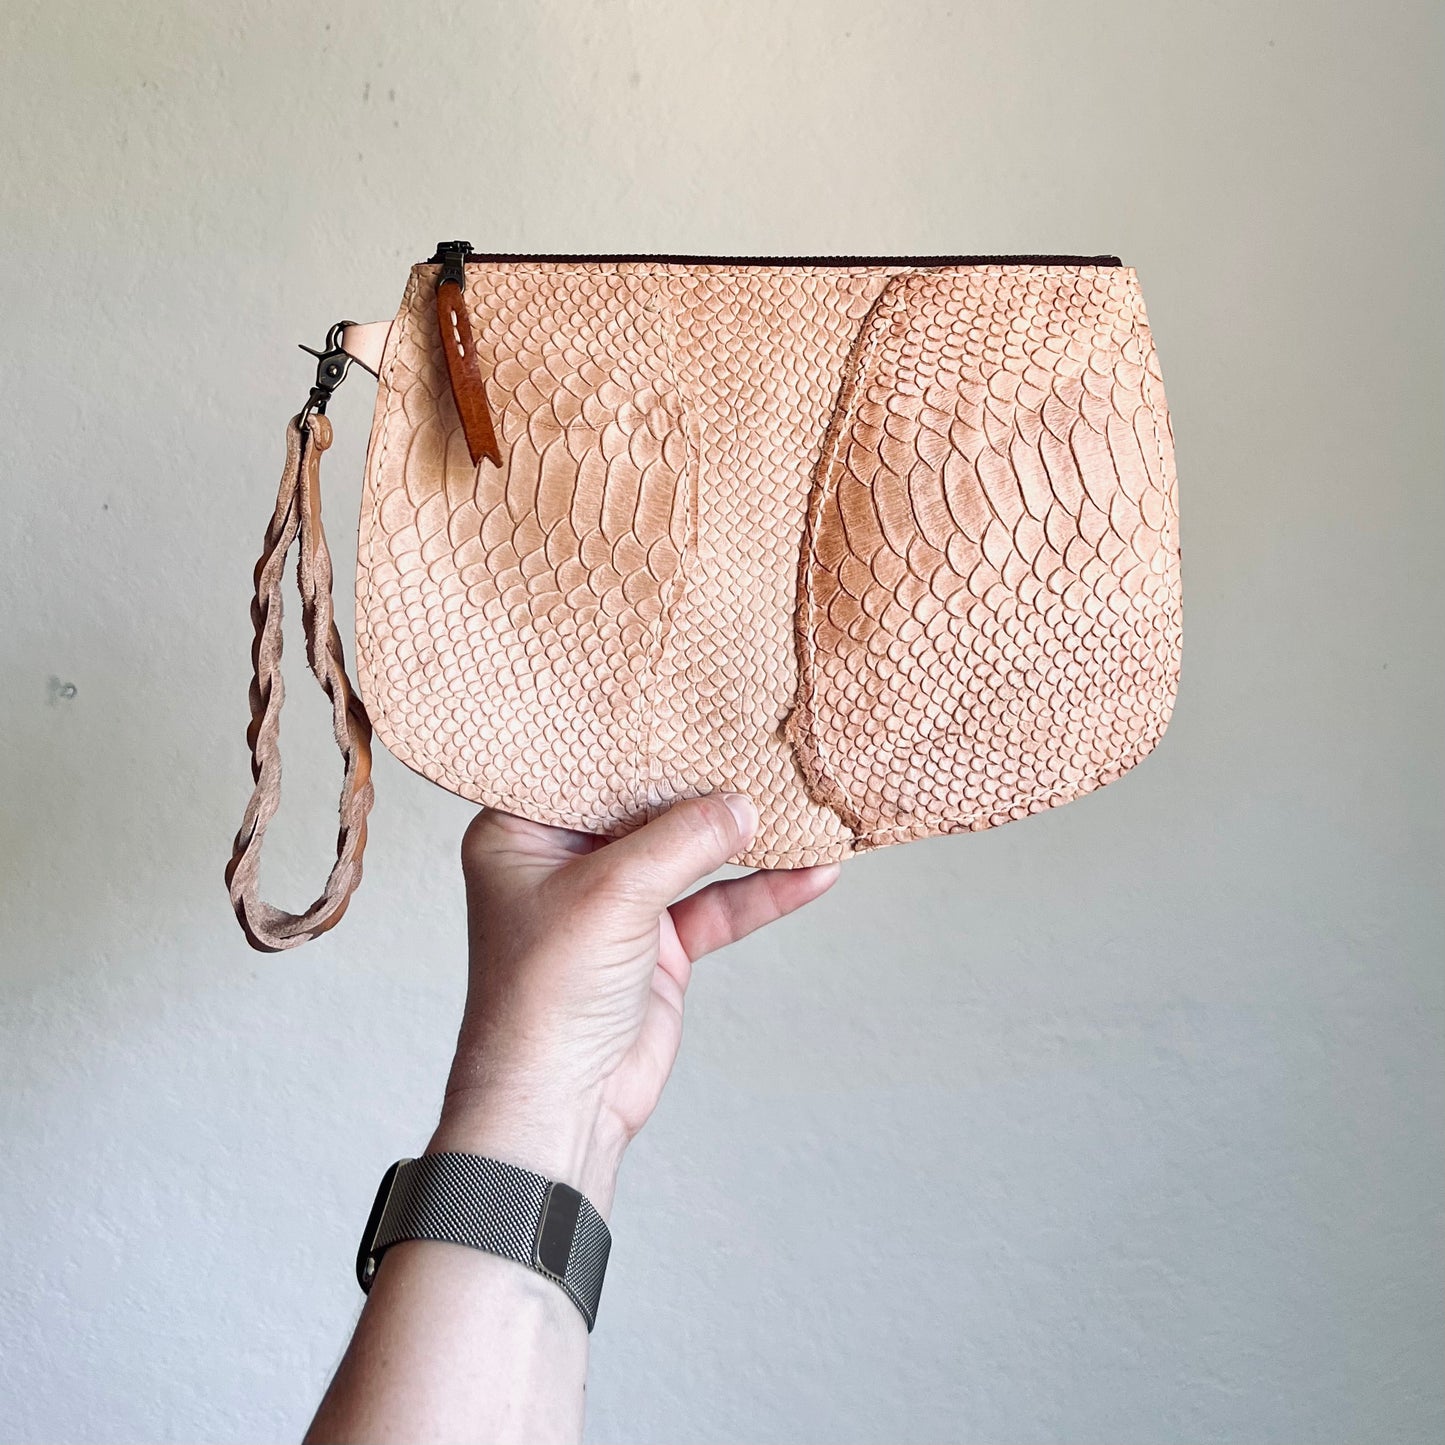 1974 Broad River Leather Wristlet in Boa Embossed 